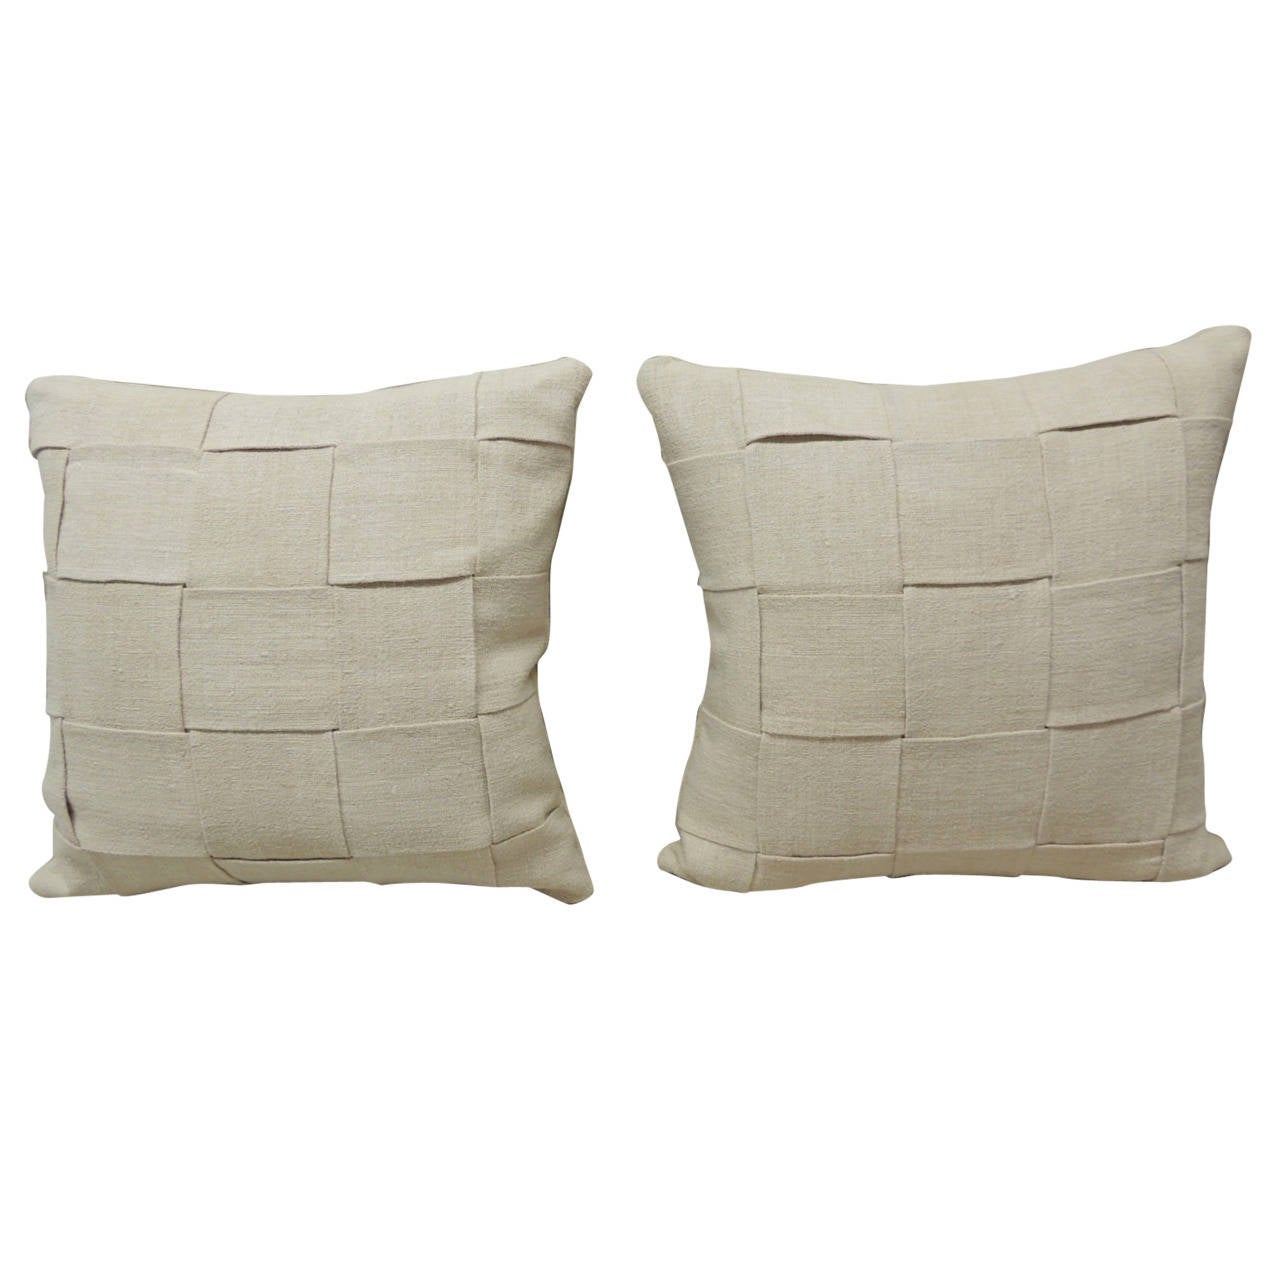 19th century homespun French oatmeal linen and natural textured linen pair of decorative pillows.   
Atelier Lam basket weave exclusive design. Natural linen backings.  Closed by hand stitch (no zipper closure.) Handcrafted and designed in the USA